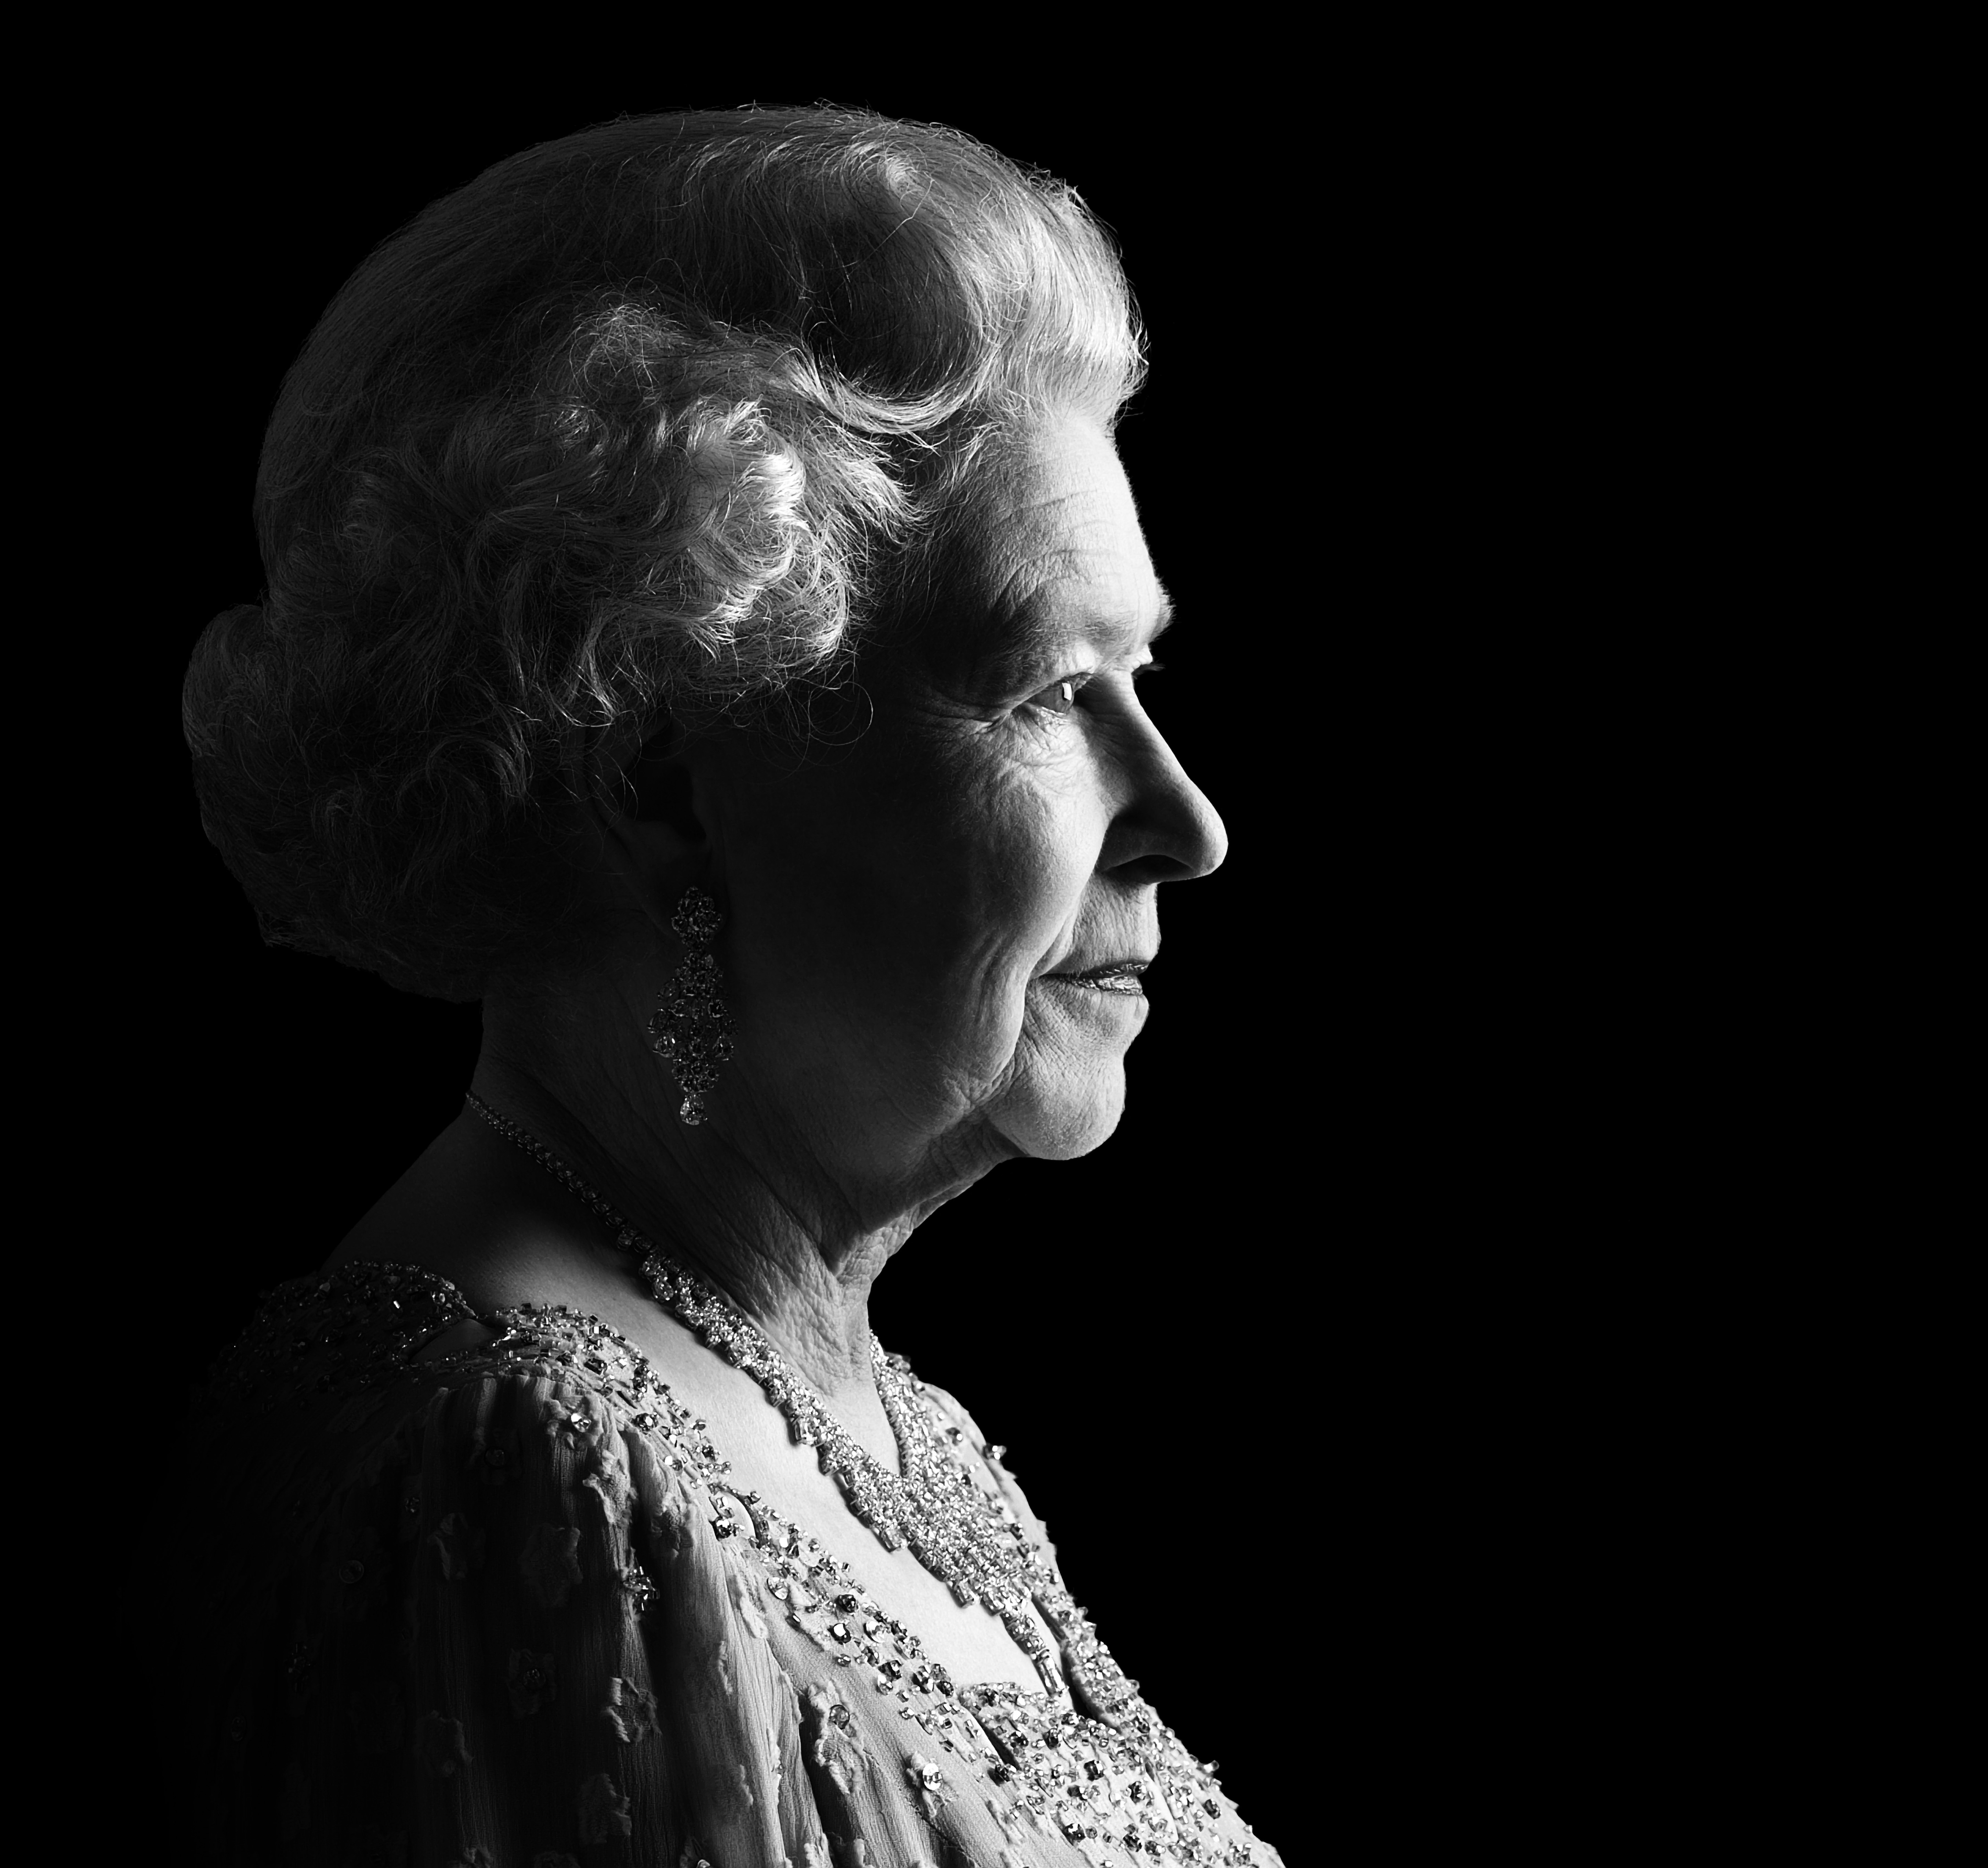 A statement on the death of Her Majesty Queen Elizabeth II 